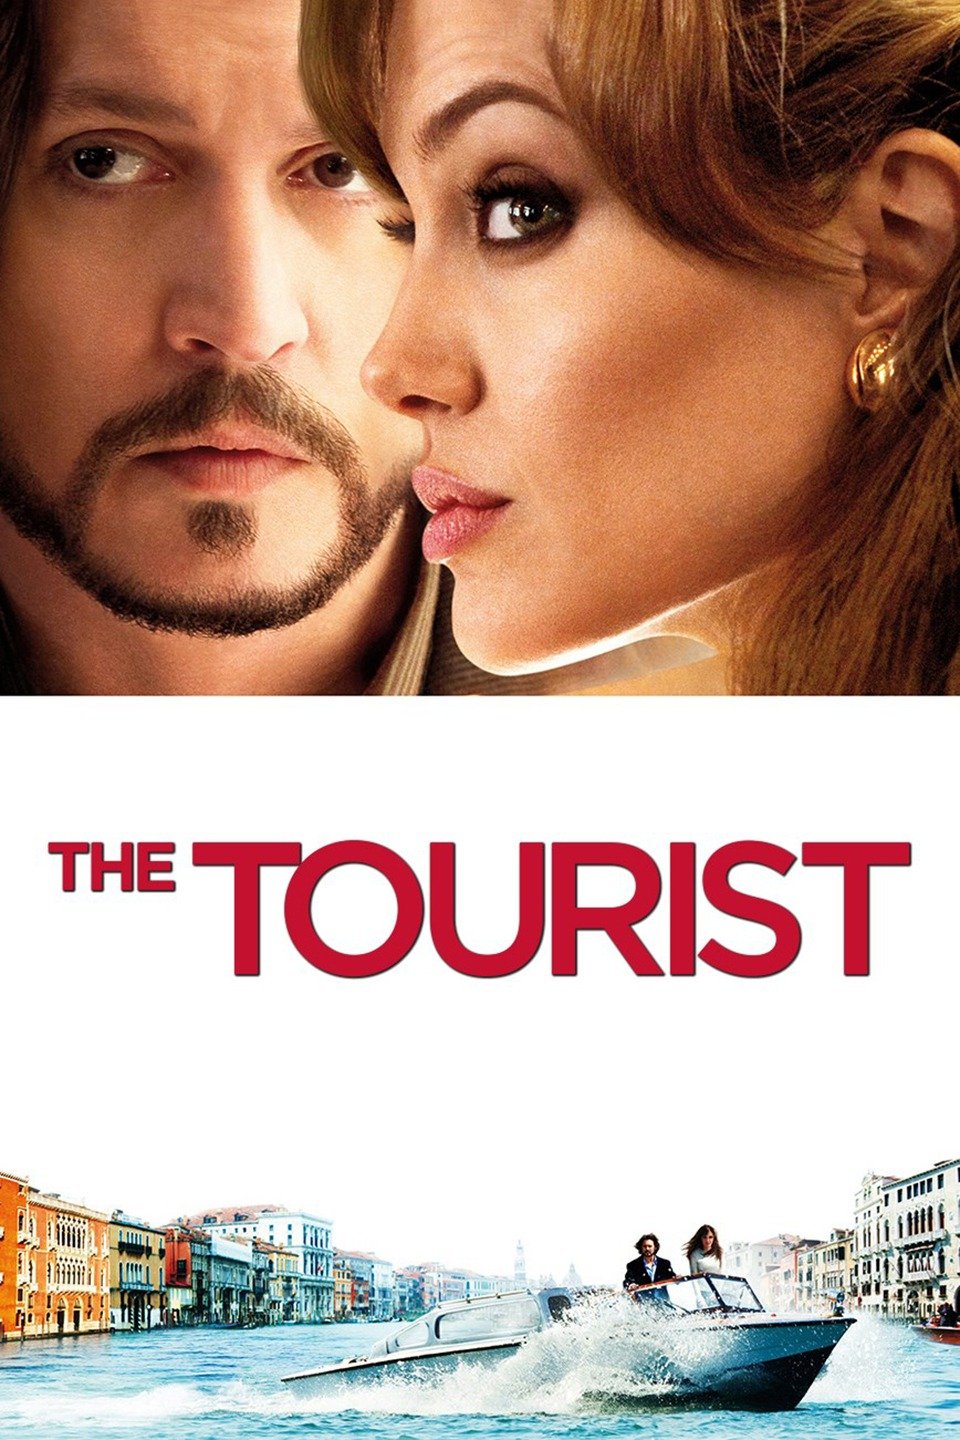 the tourist review movie